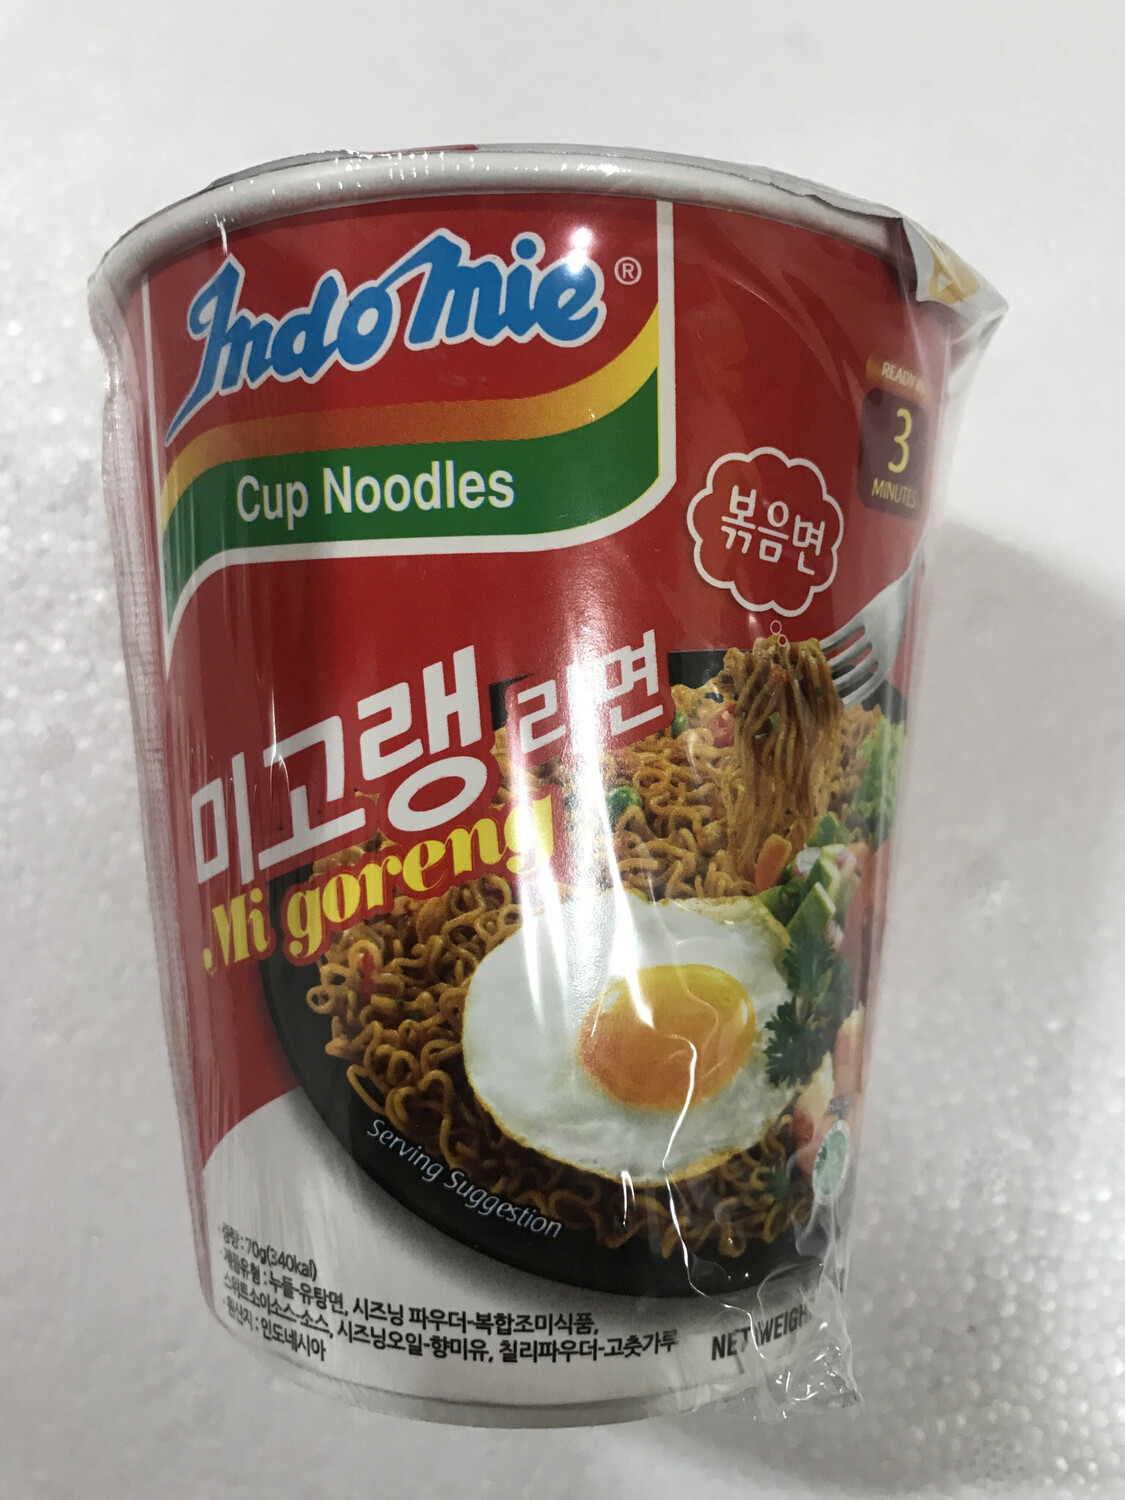 Indomie Cup Mie Goreng